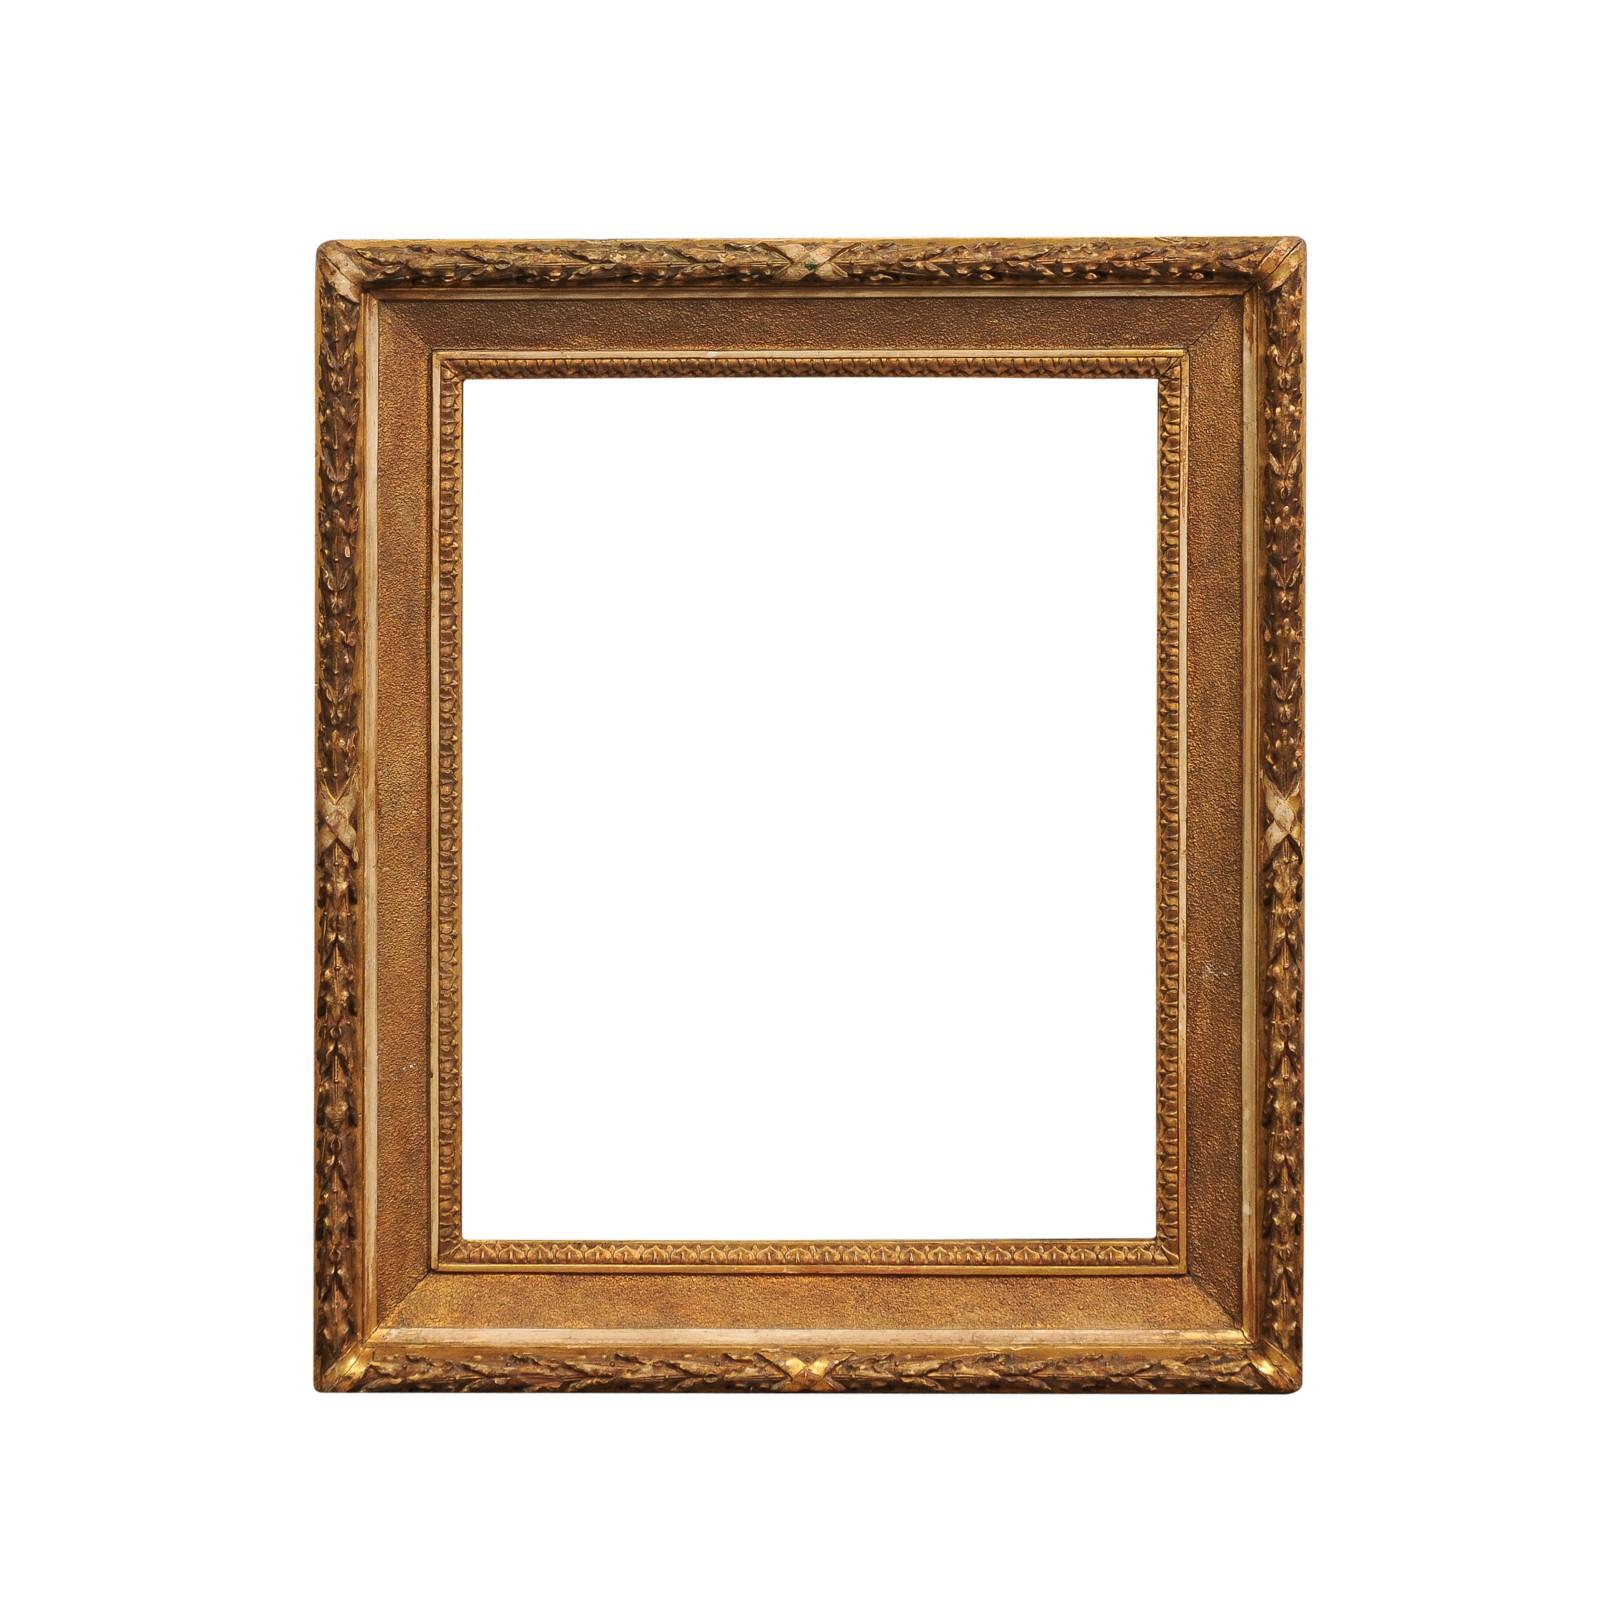 An Italian giltwood frame from the 19th century with carved foliage frieze and rais-de-cœur motifs. Hailing from the 19th century, this Italian giltwood frame is a testament to the era's affinity for ornate and elaborate details. The frame's lavish